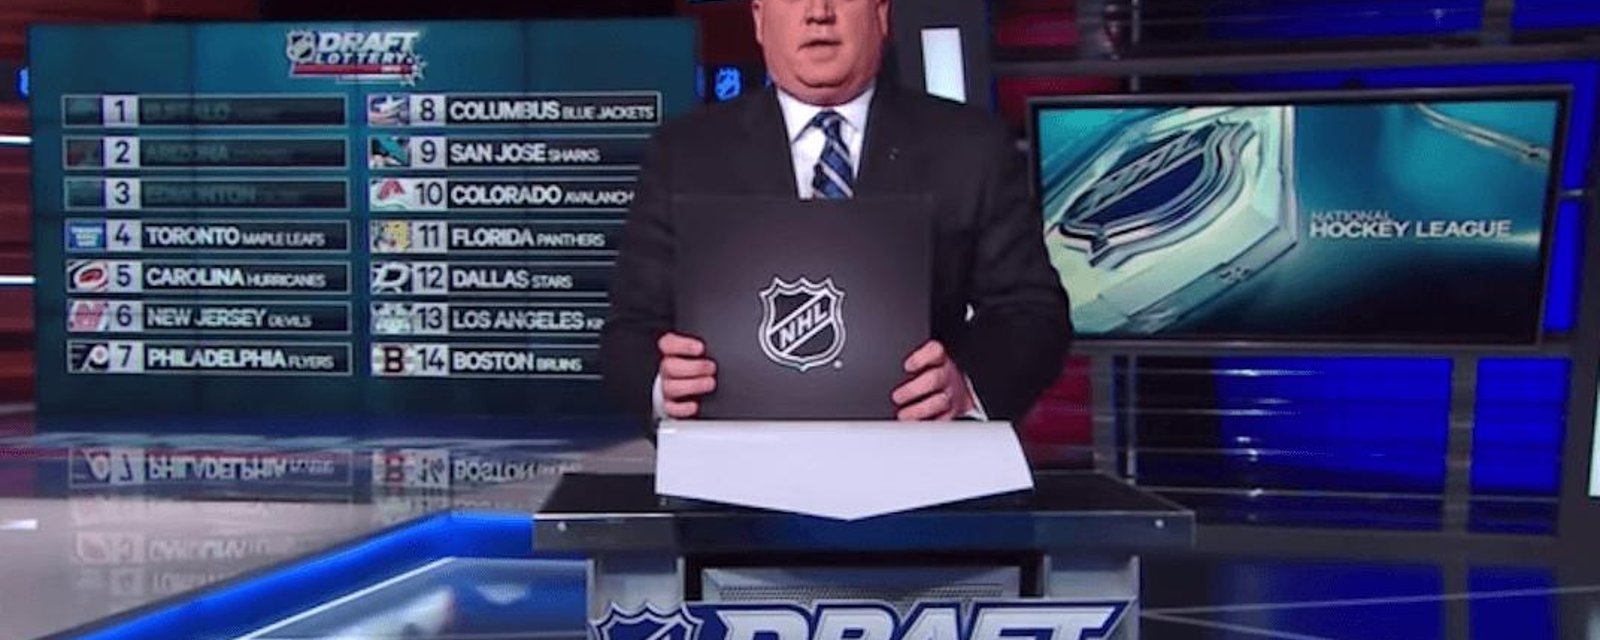 NHL offers clear rules for Friday’s draft lottery! 